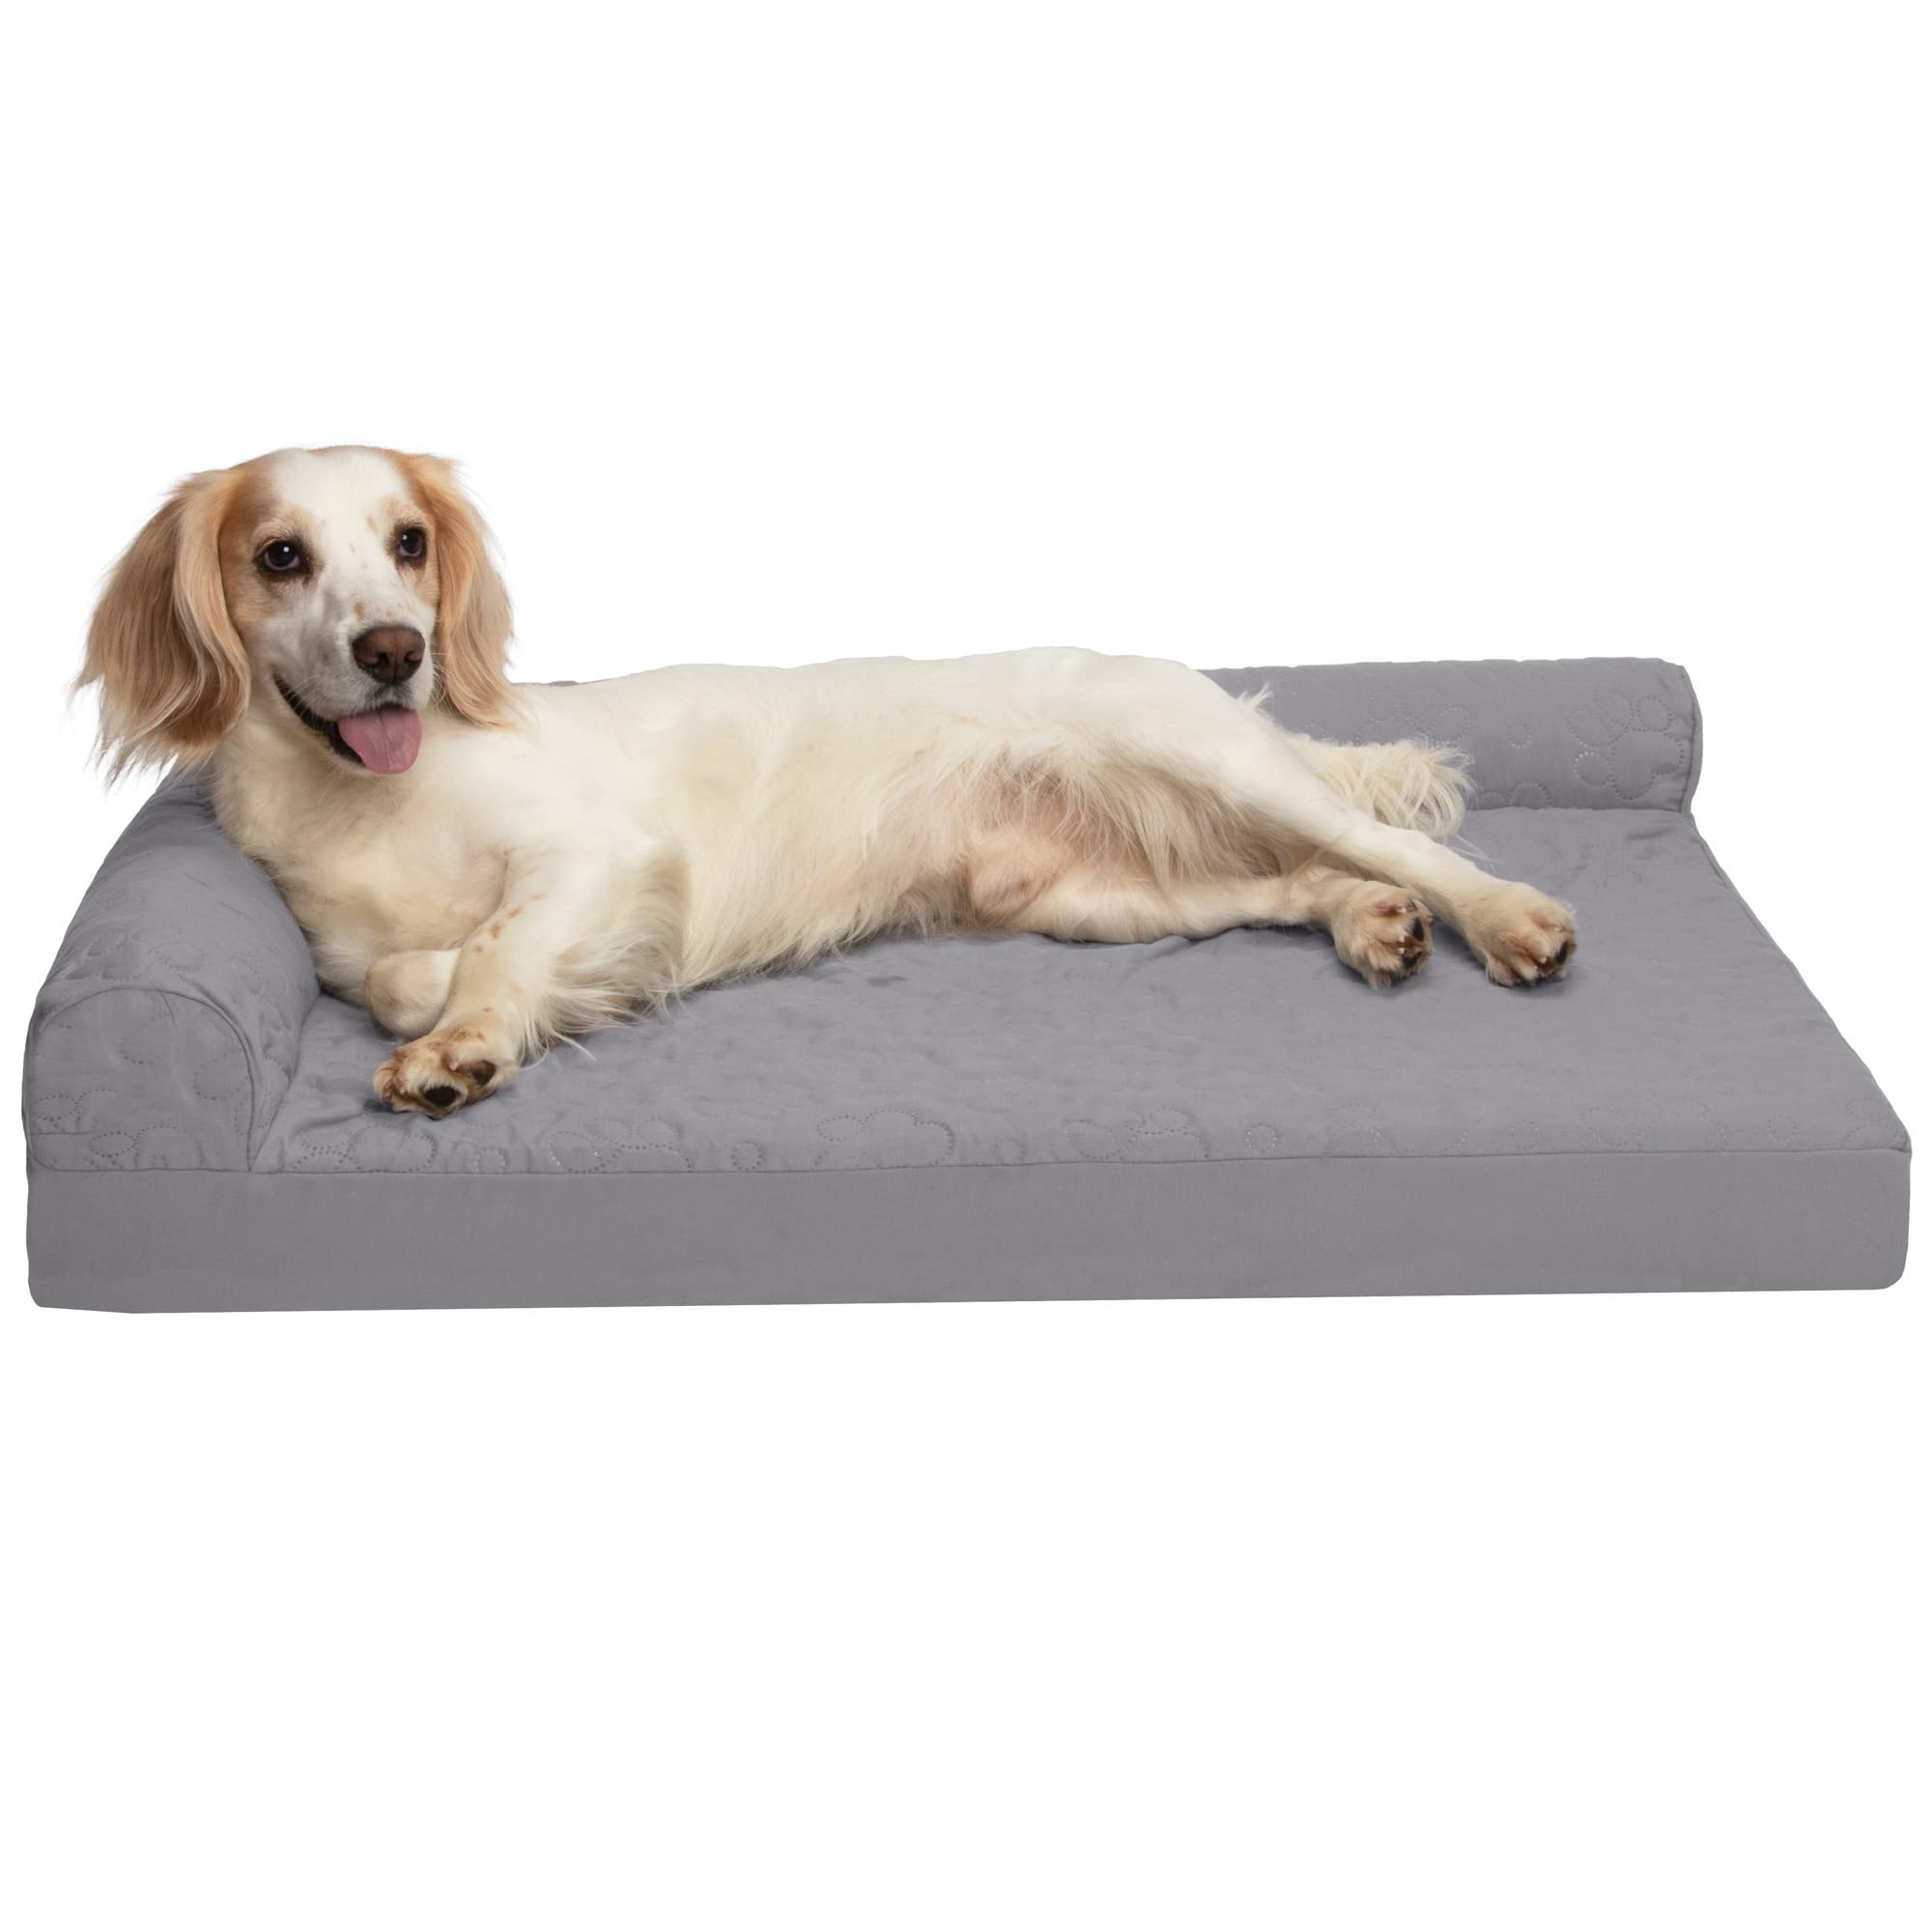 Furhaven Large Memory Foam Dog Bed Pinsonic Quilted Paw L Shaped Chaise w/ Removable Washable Cover - Titanium, Large